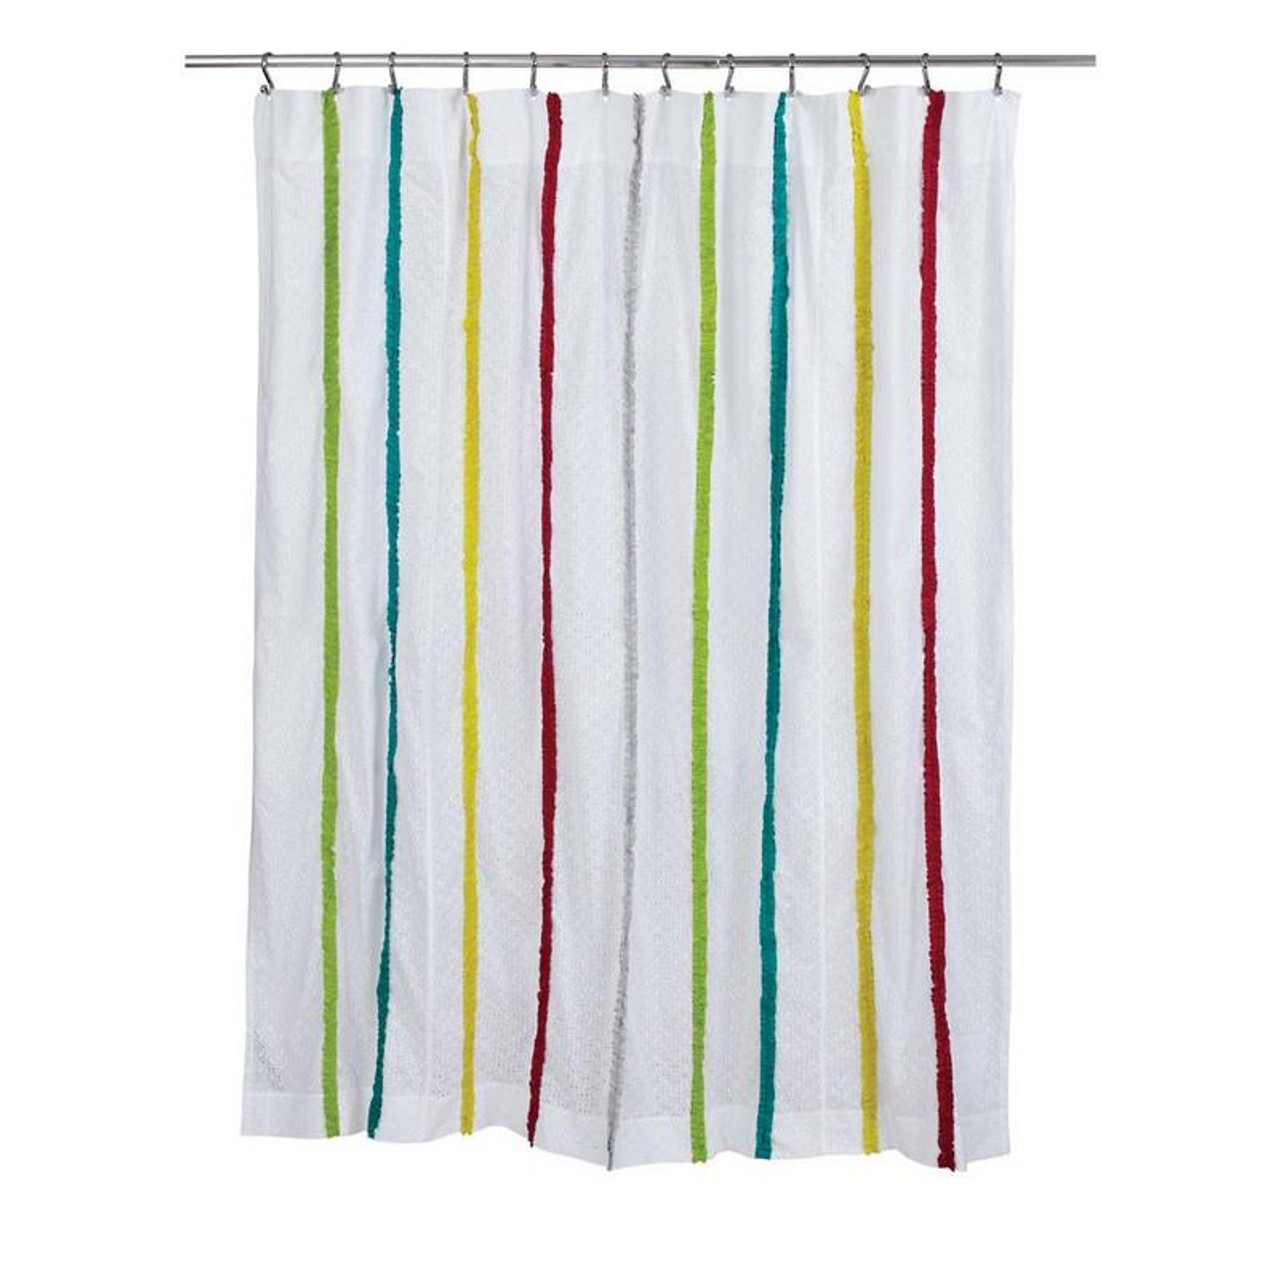 Everly Shower Curtain 72x72 by VHC Brands for sale online 